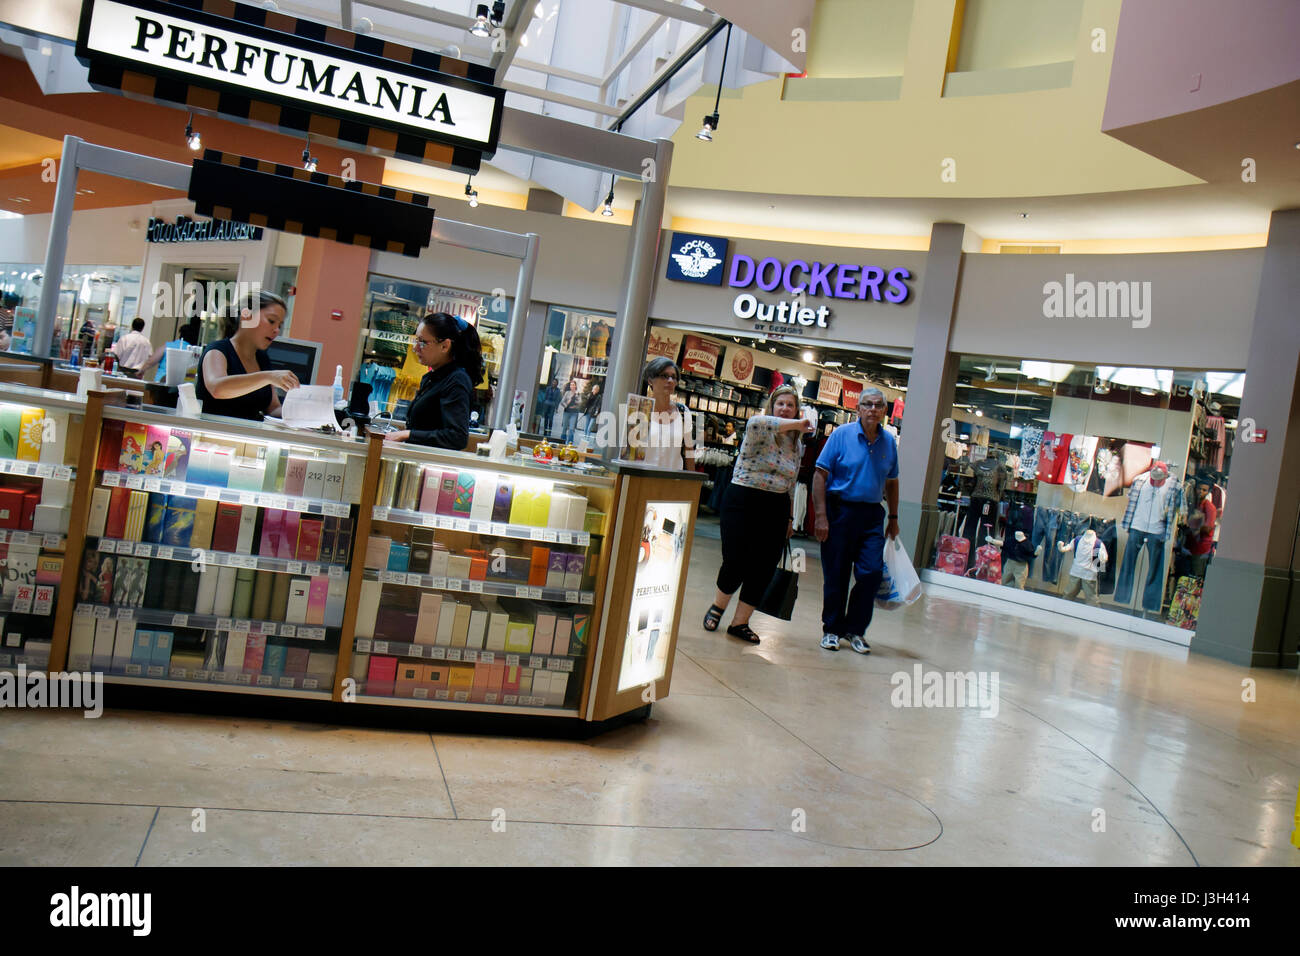 Miami Florida,Dolphin Mall,Perfumania,Dockers Outlet,discount,employee  merchant,booth,stand,fragrance,perfume,shoppers,shopping shopper shoppers  shop Stock Photo - Alamy